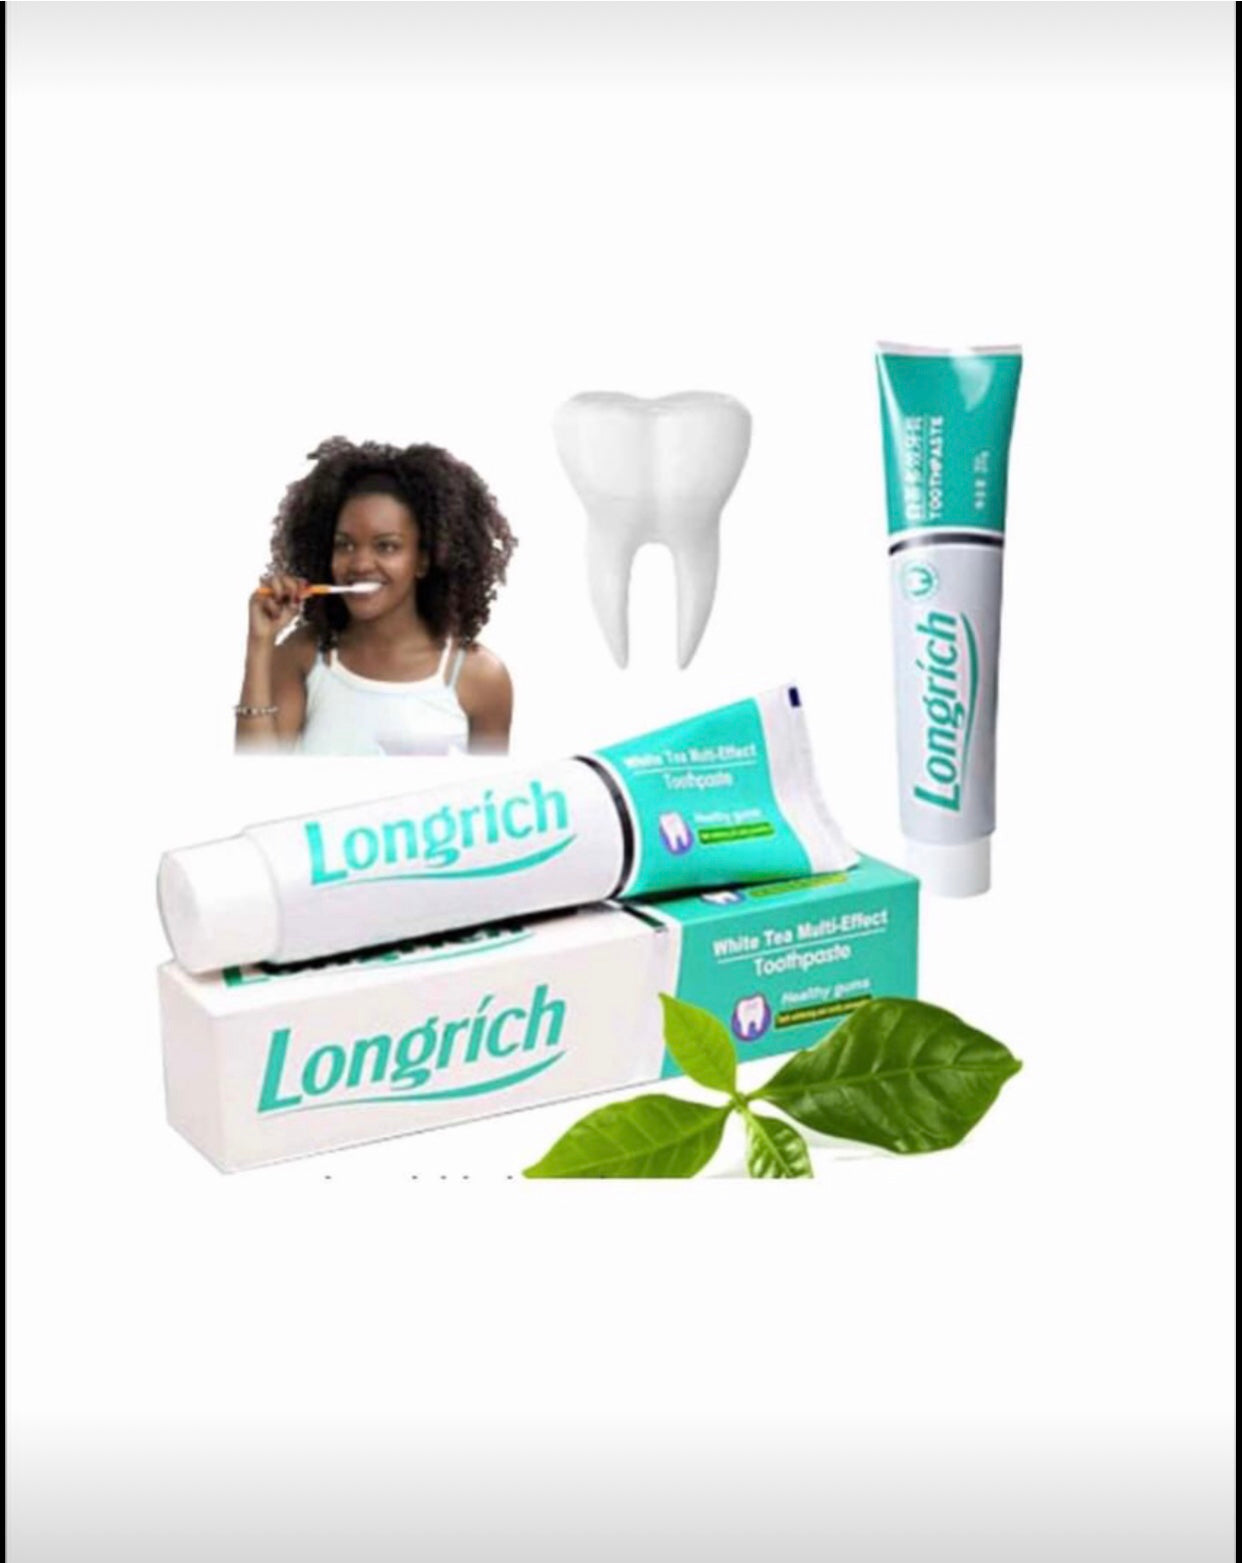 Longrich White Tea Toothpaste (200g) Multi -Effect Deep Cleaning/ Healthy Gum- Fluoride Free